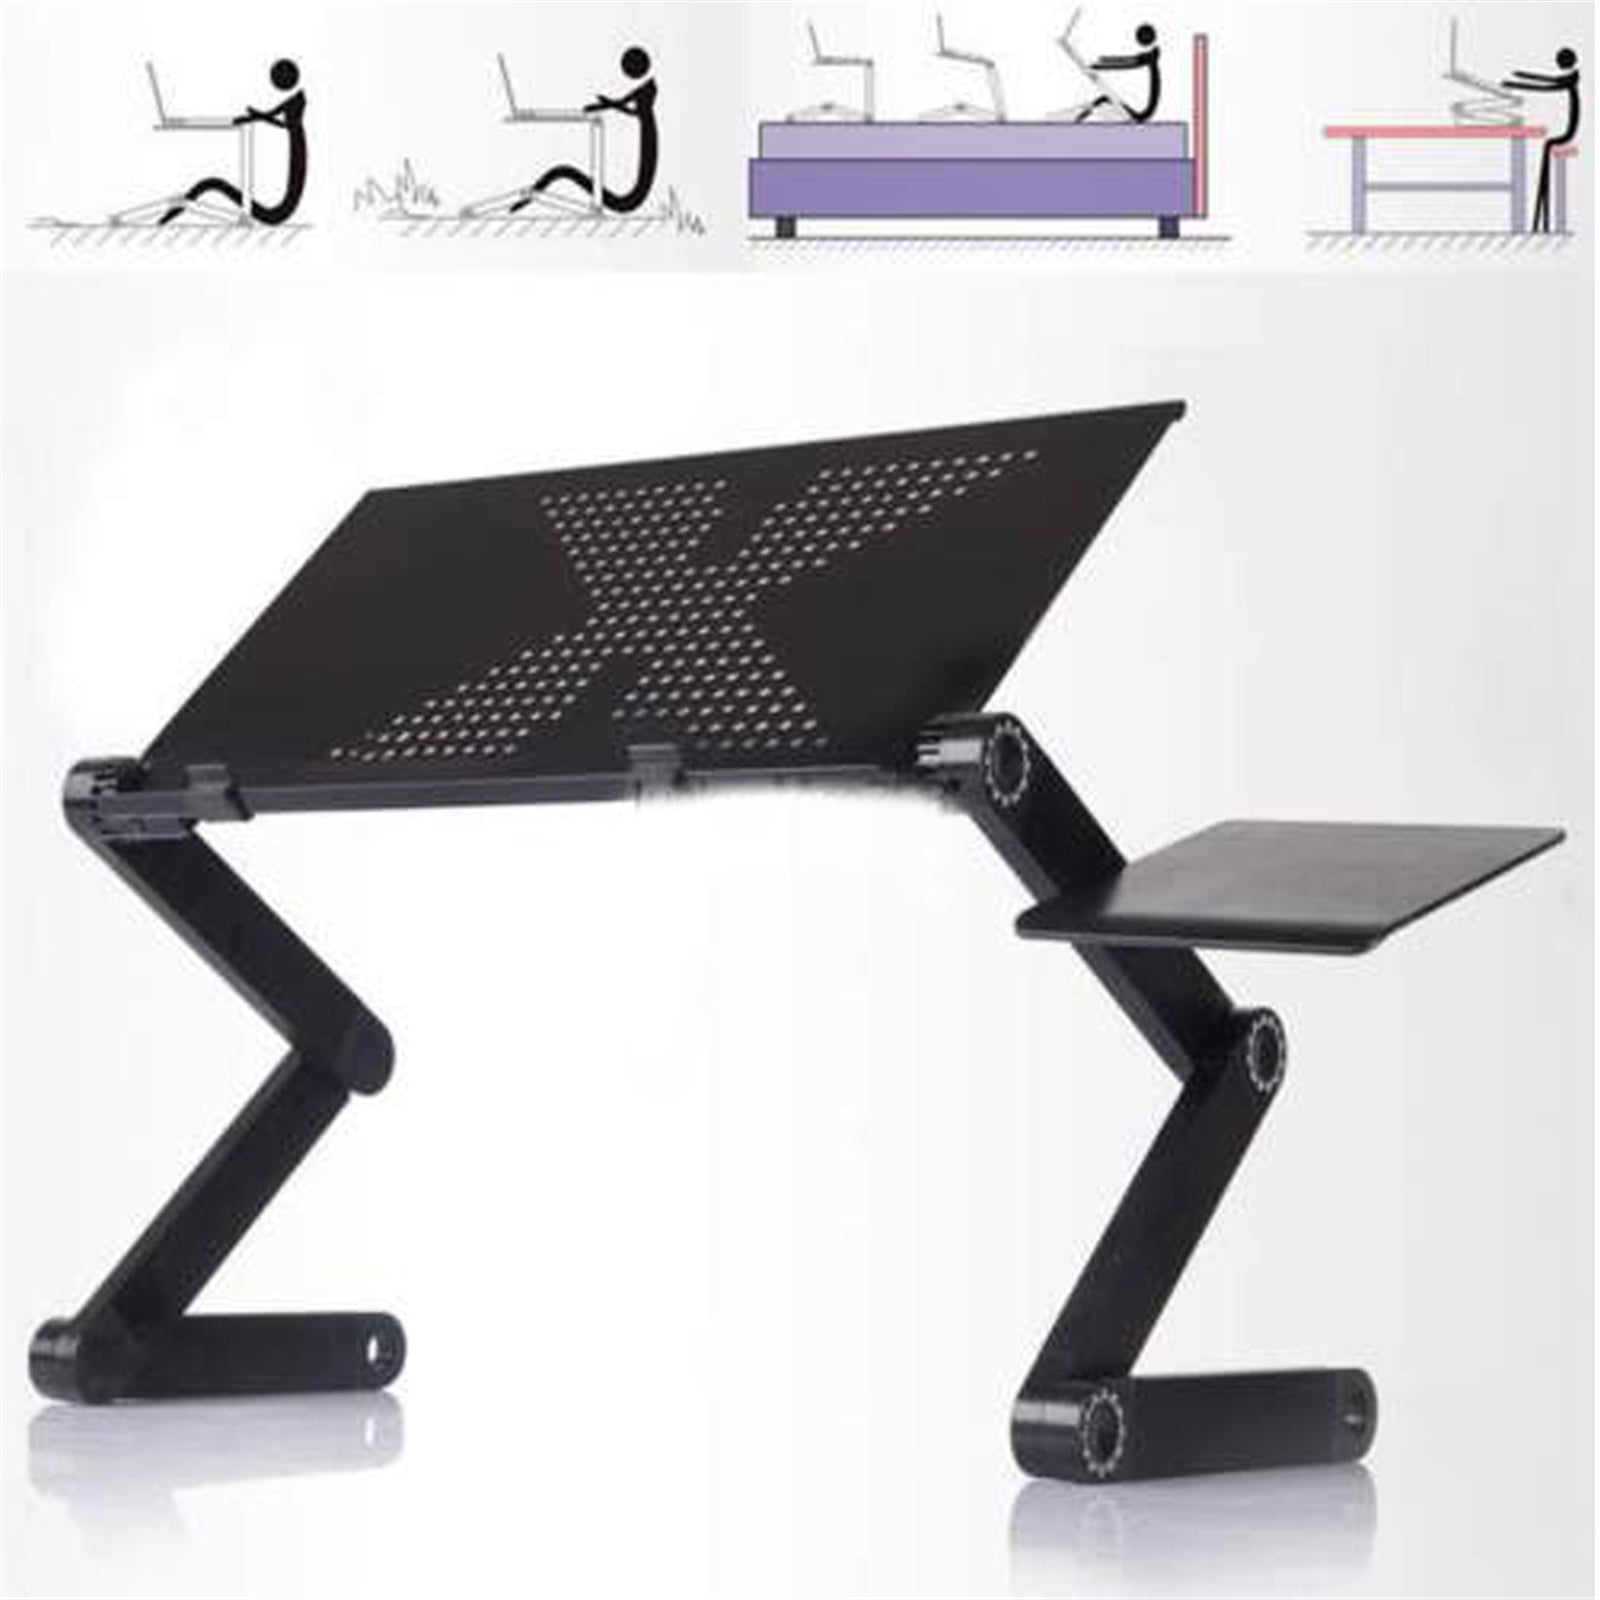 Free shipping Adjustable Laptop Stand, Portable Laptop Table Stand Ergonomic Lap Desk TV Bed Tray Standing Desk YJ